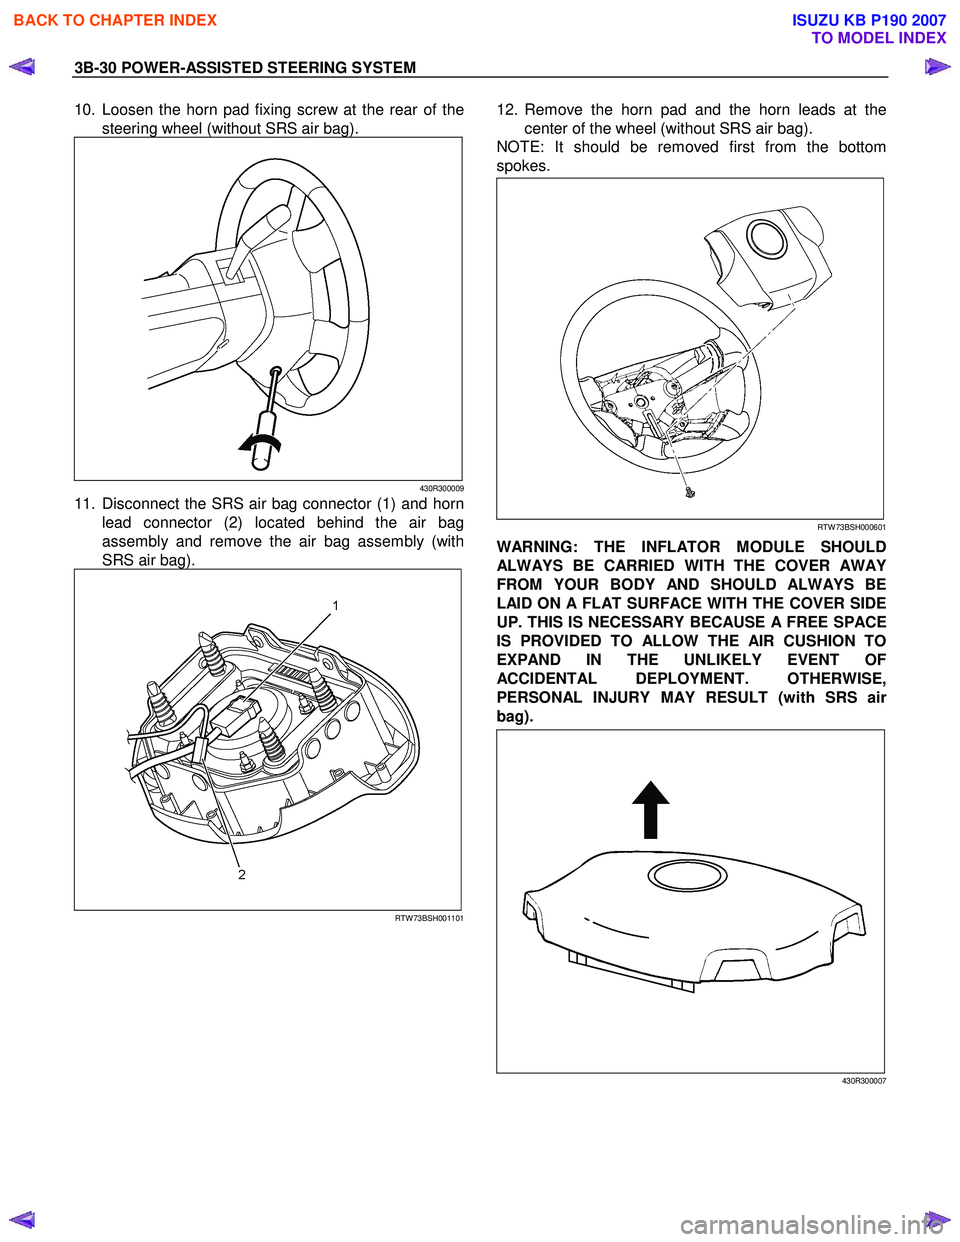 ISUZU KB P190 2007  Workshop Owners Guide 3B-30 POWER-ASSISTED STEERING SYSTEM 
10.  Loosen the horn pad fixing screw at the rear of the
steering wheel (without SRS air bag). 
430R300009
11.  Disconnect the SRS air bag connector (1) and horn 